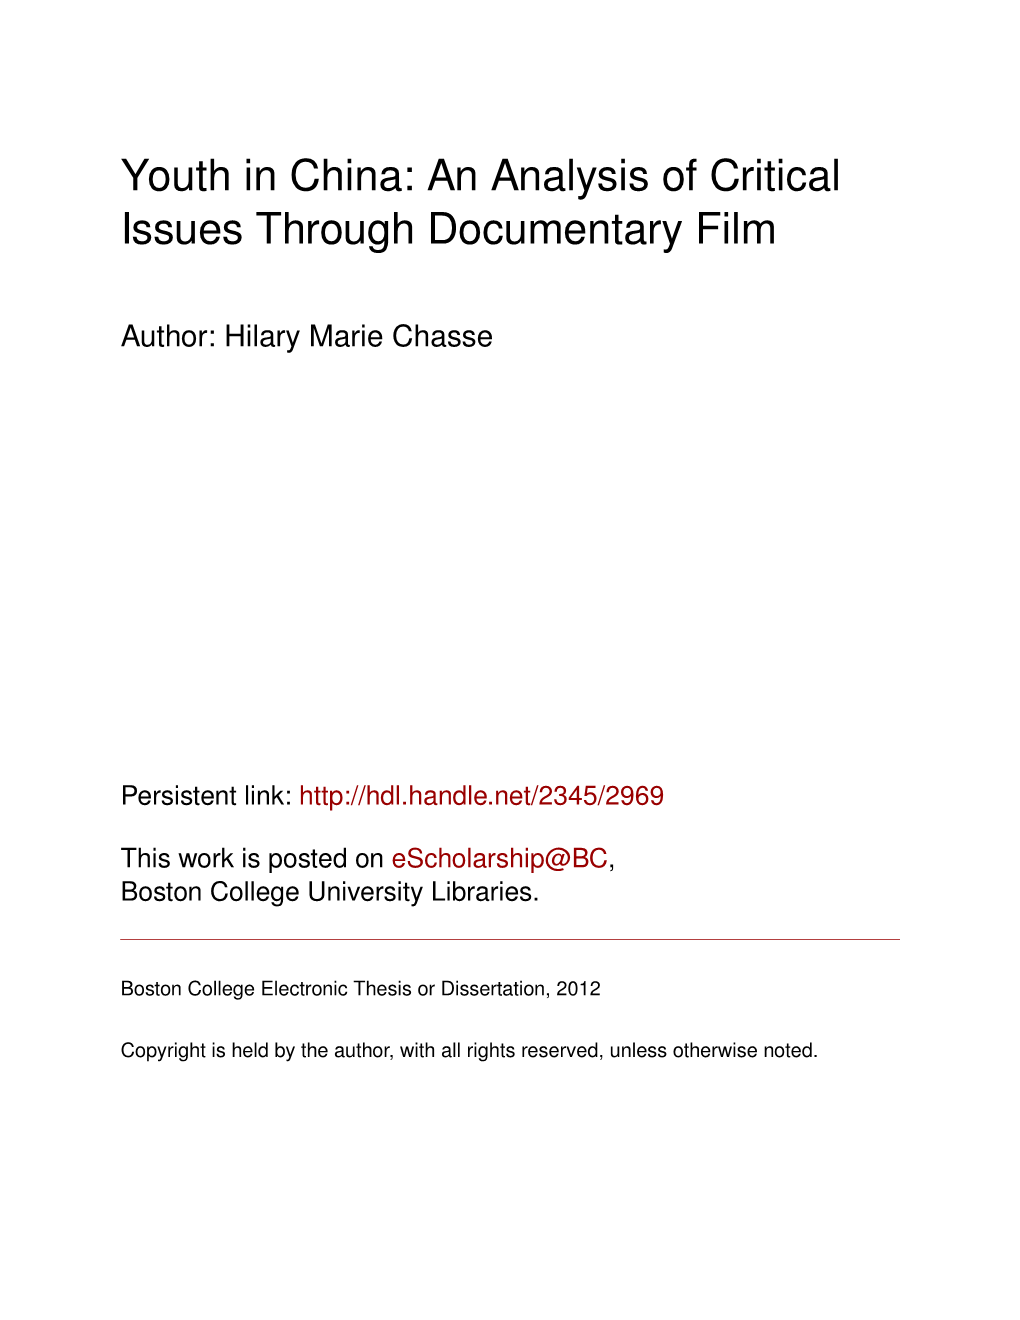 Youth in China: an Analysis of Critical Issues Through Documentary Film